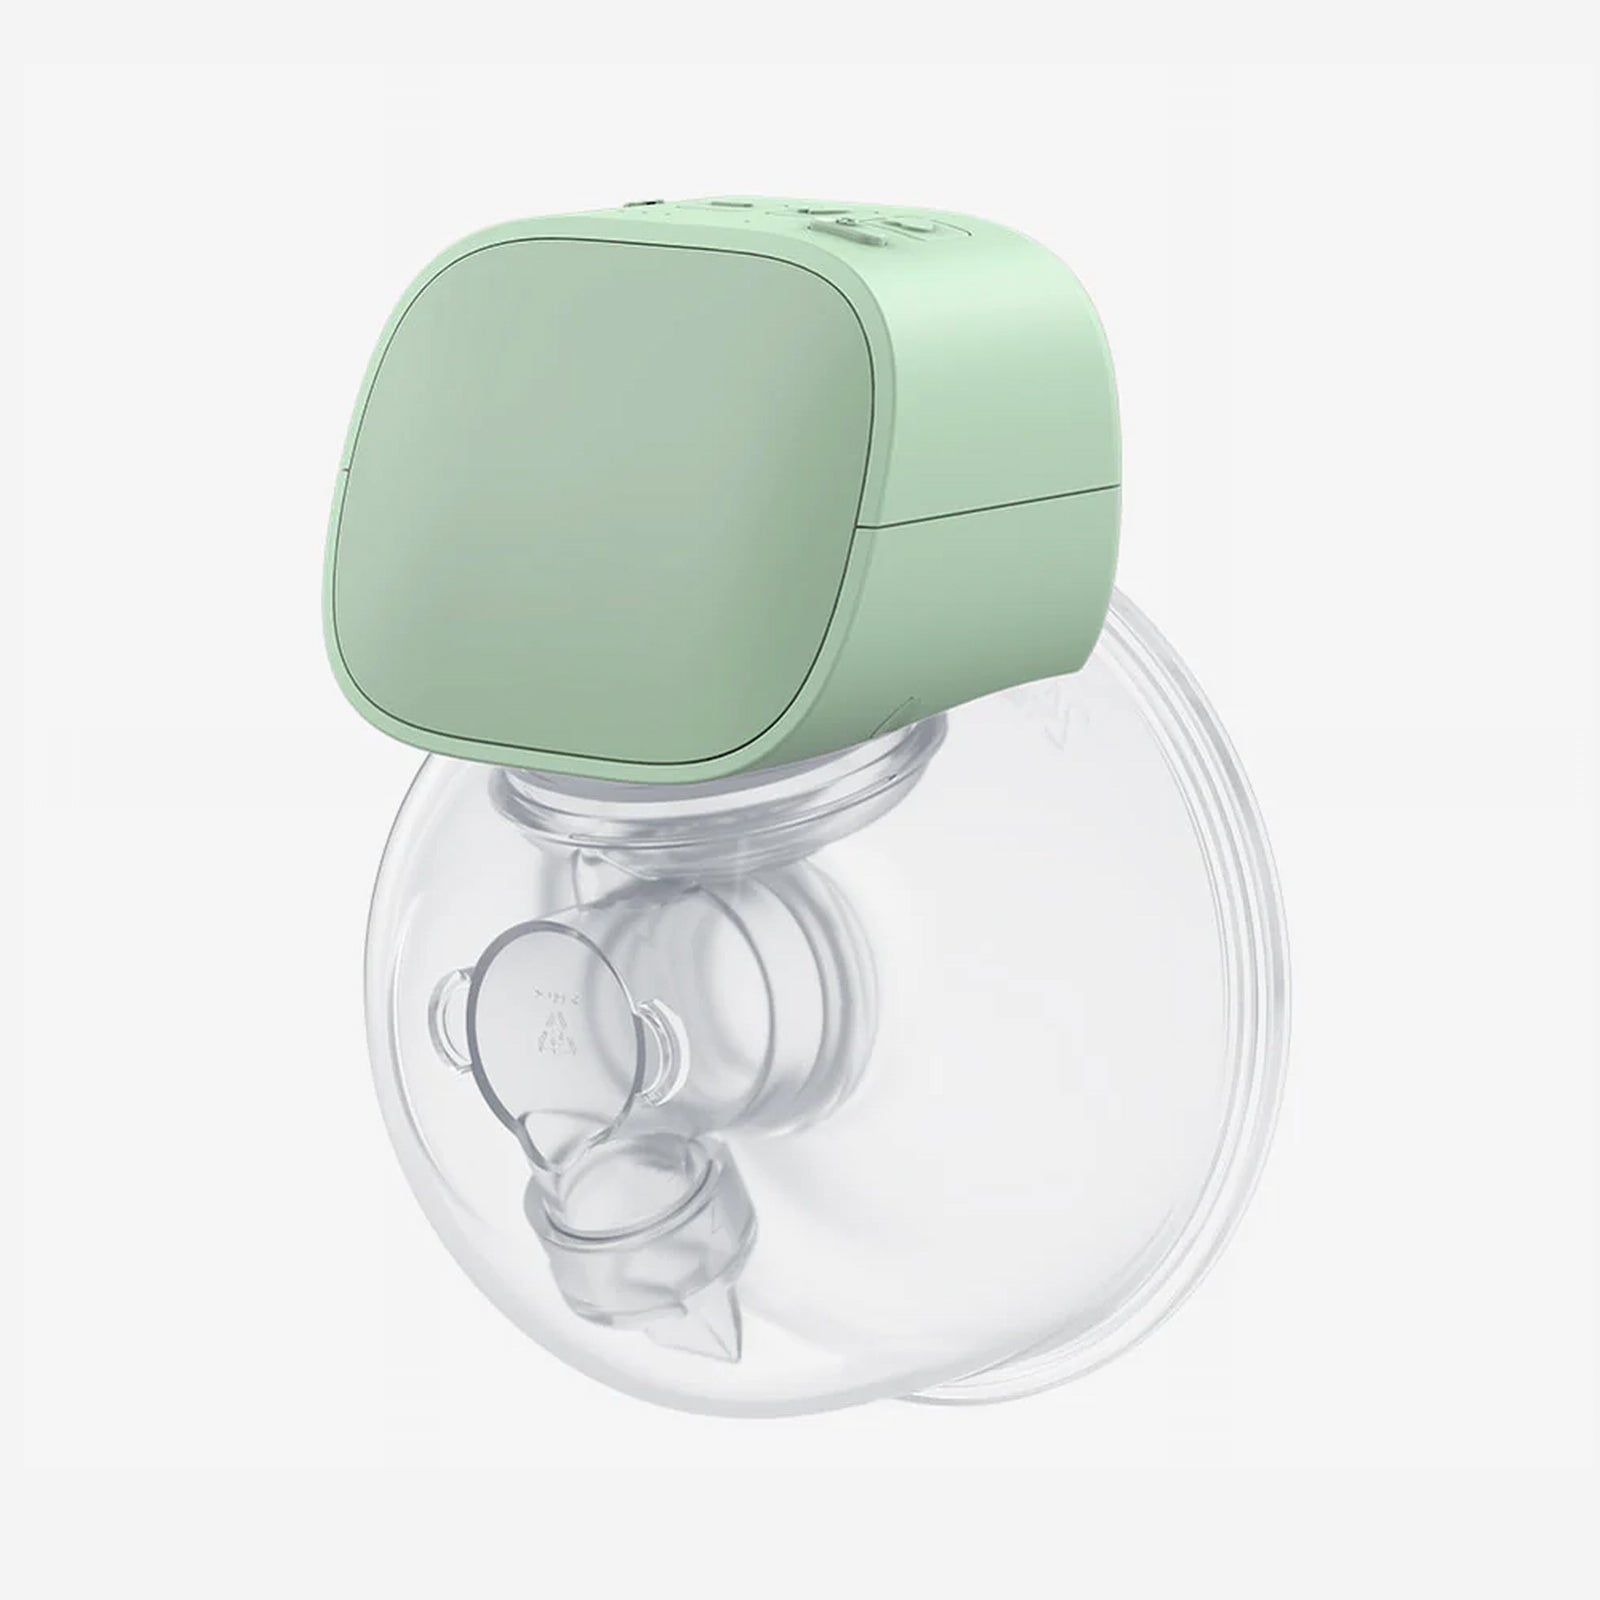 Mamomy S9 Double Wearable Breast Pump, Hands-Free Breast Pump